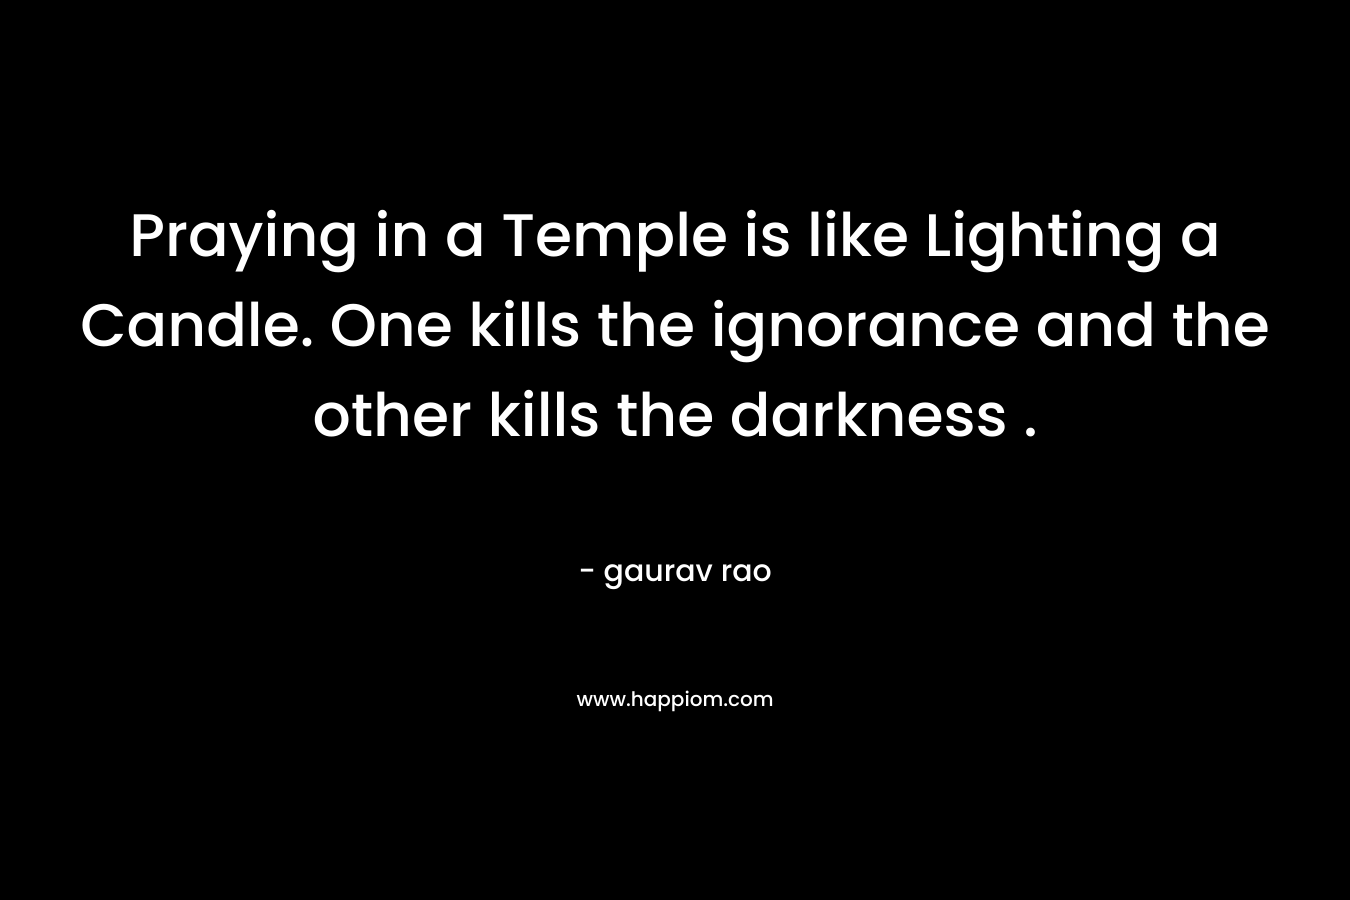 Praying in a Temple is like Lighting a Candle. One kills the ignorance and the other kills the darkness .